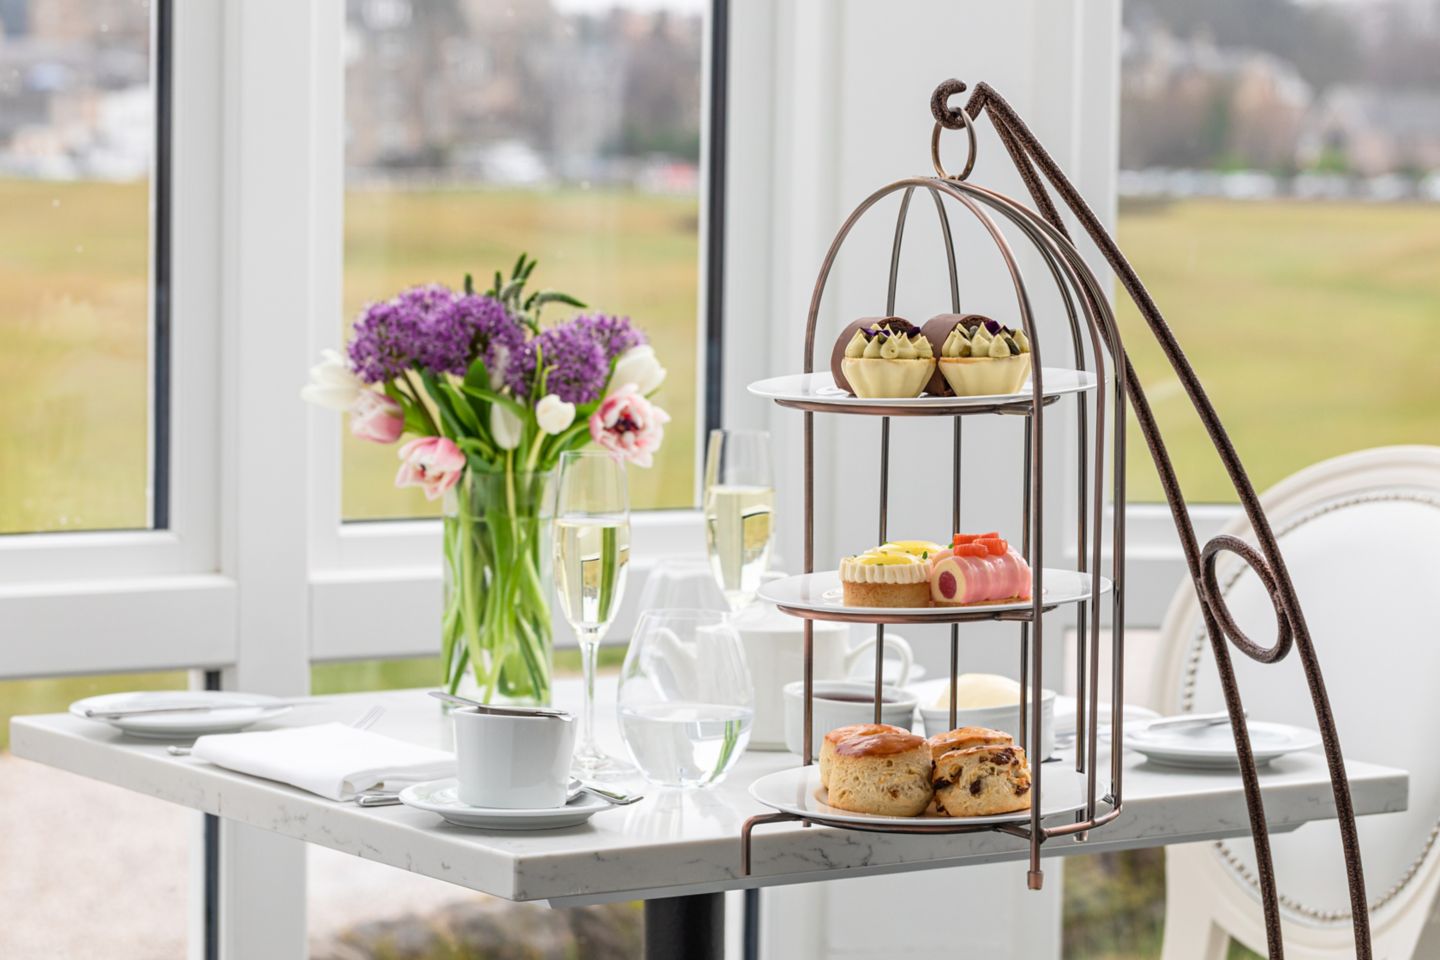 Afternoon Tea at the Old Course Hotel, Golf Resort & Spa